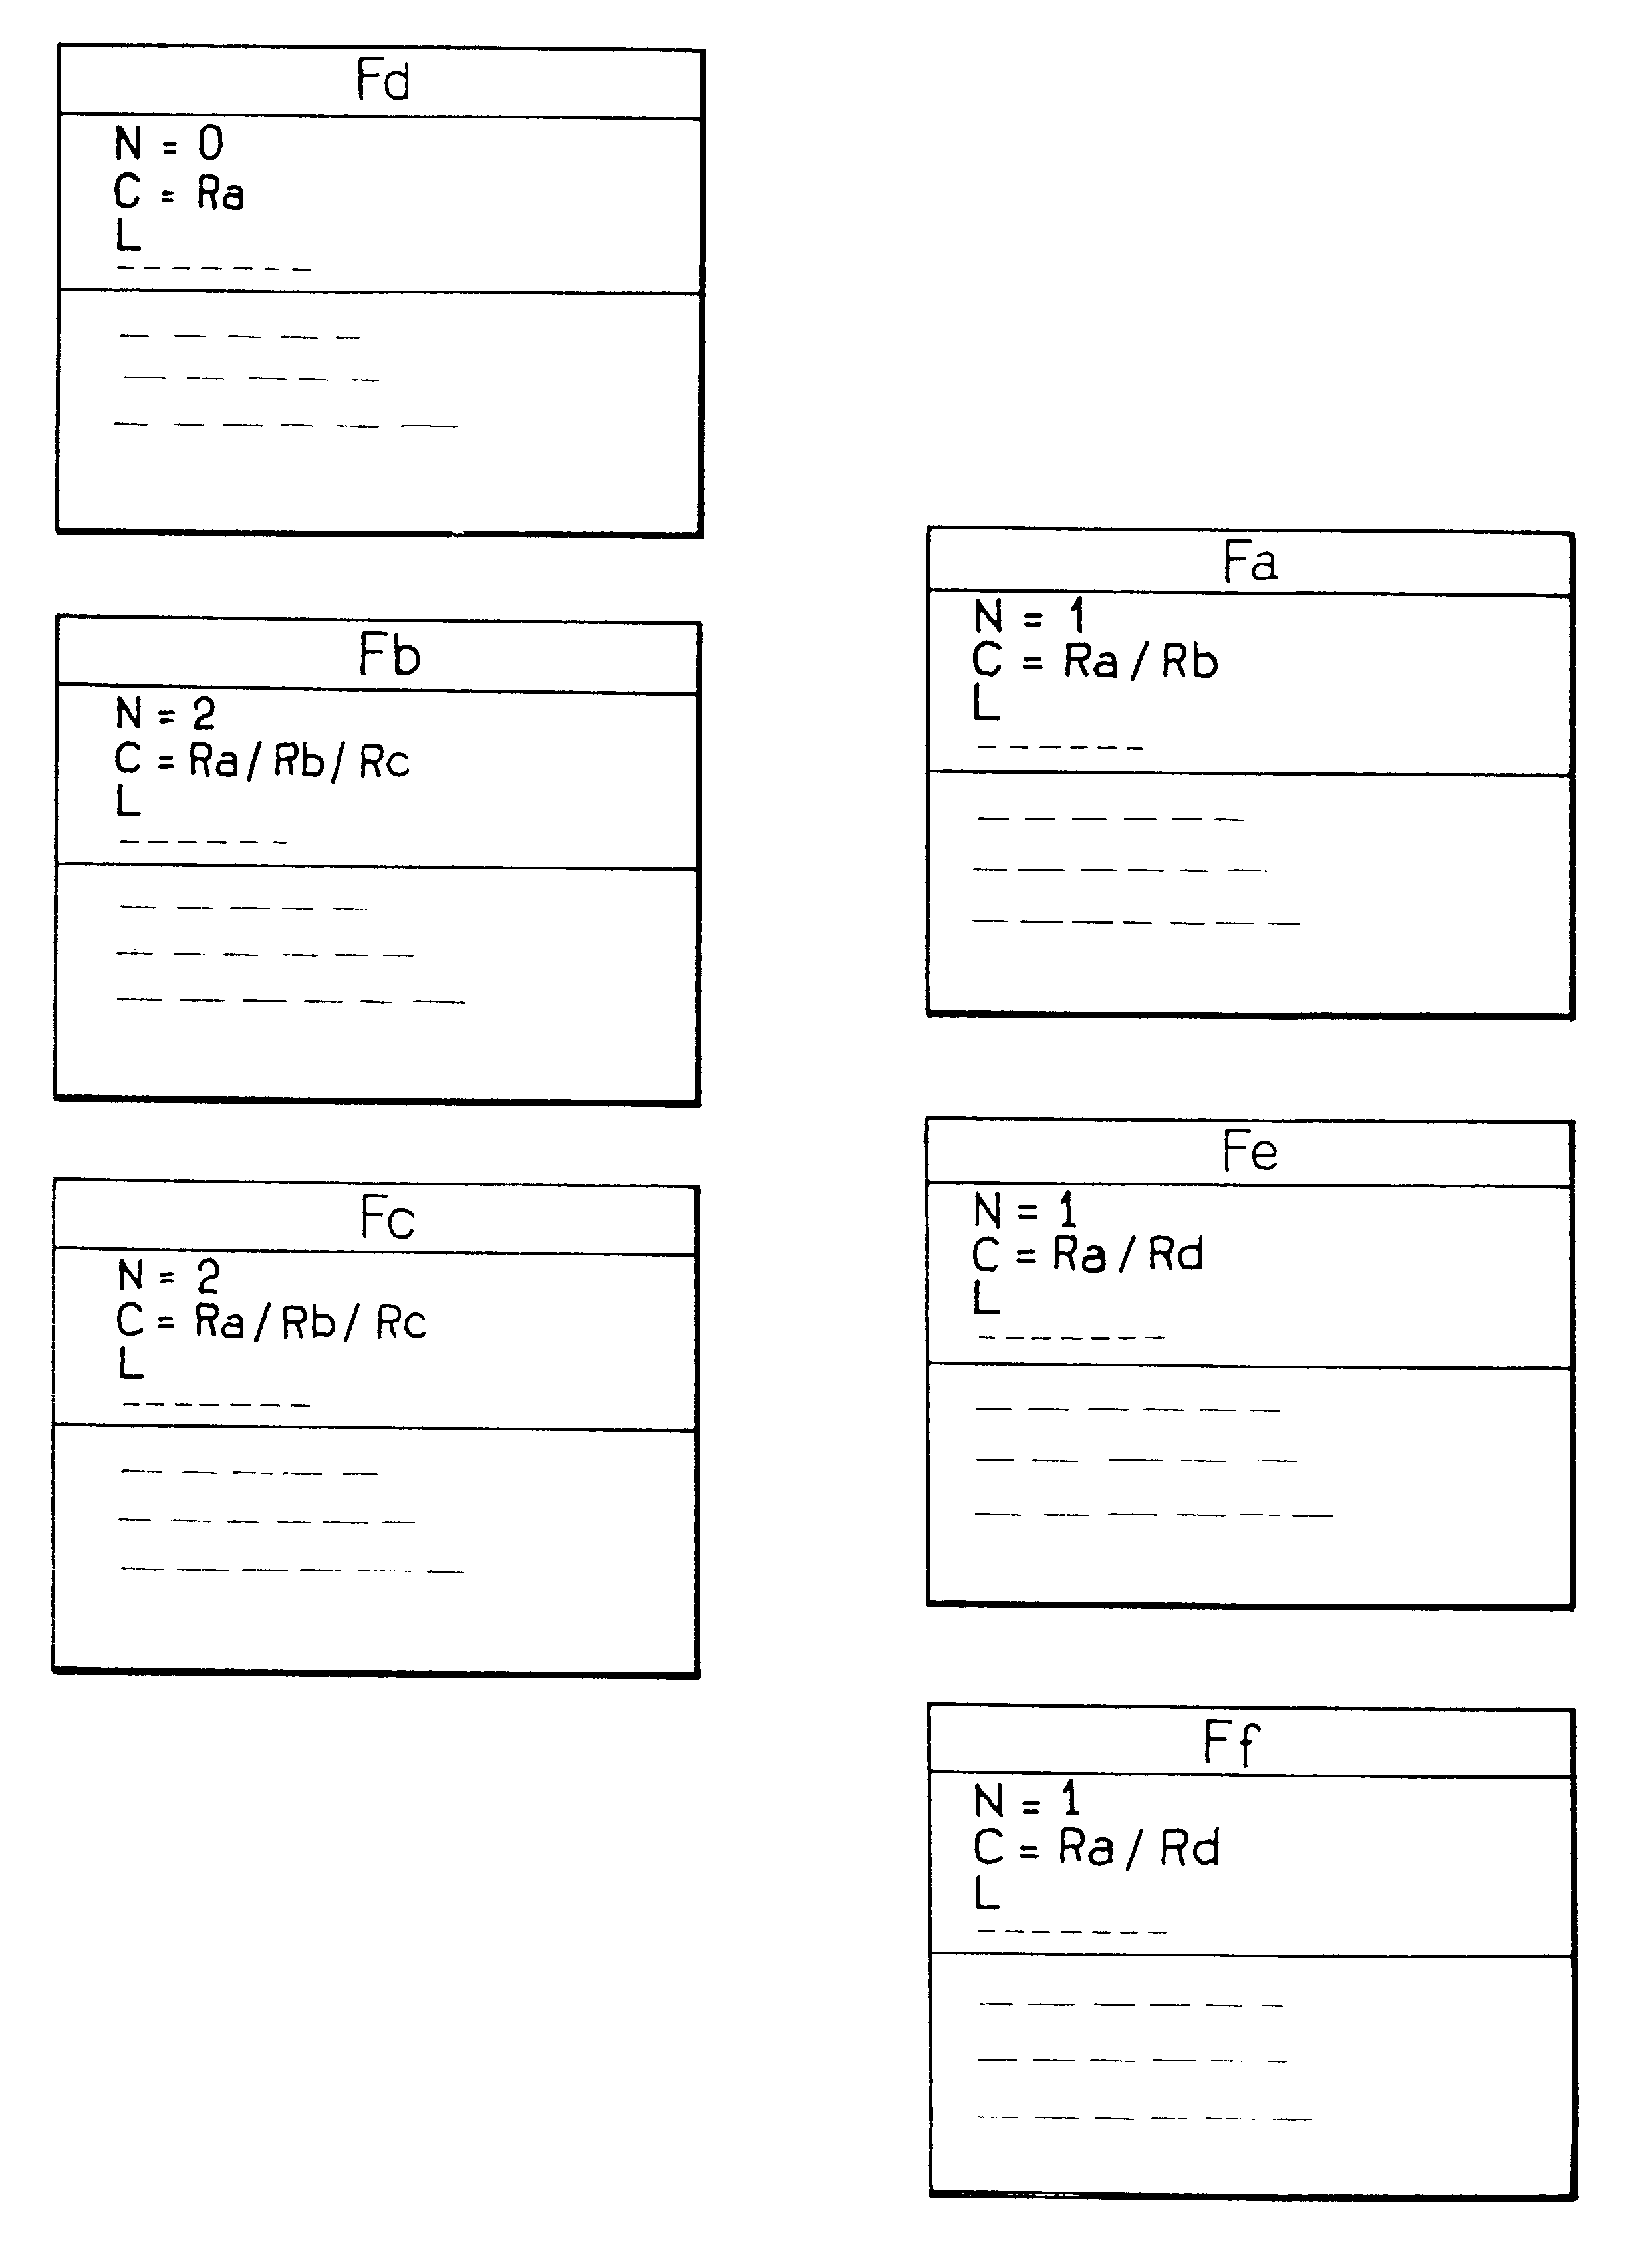 Integrated circuit card comprising files classified in a tree structure